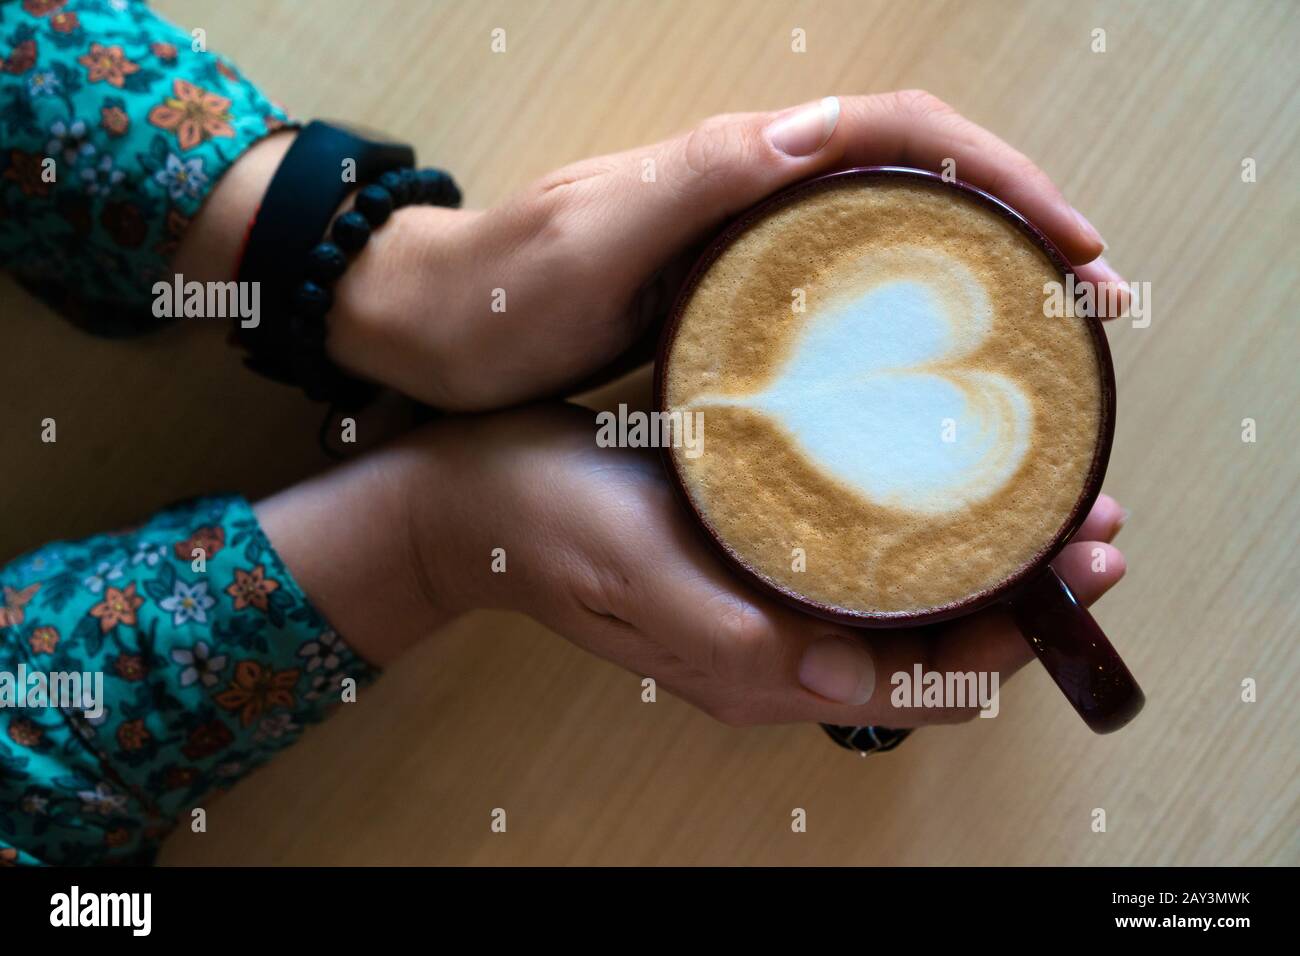 Female hands hugging a large mug with cappuccino.  Stock Photo